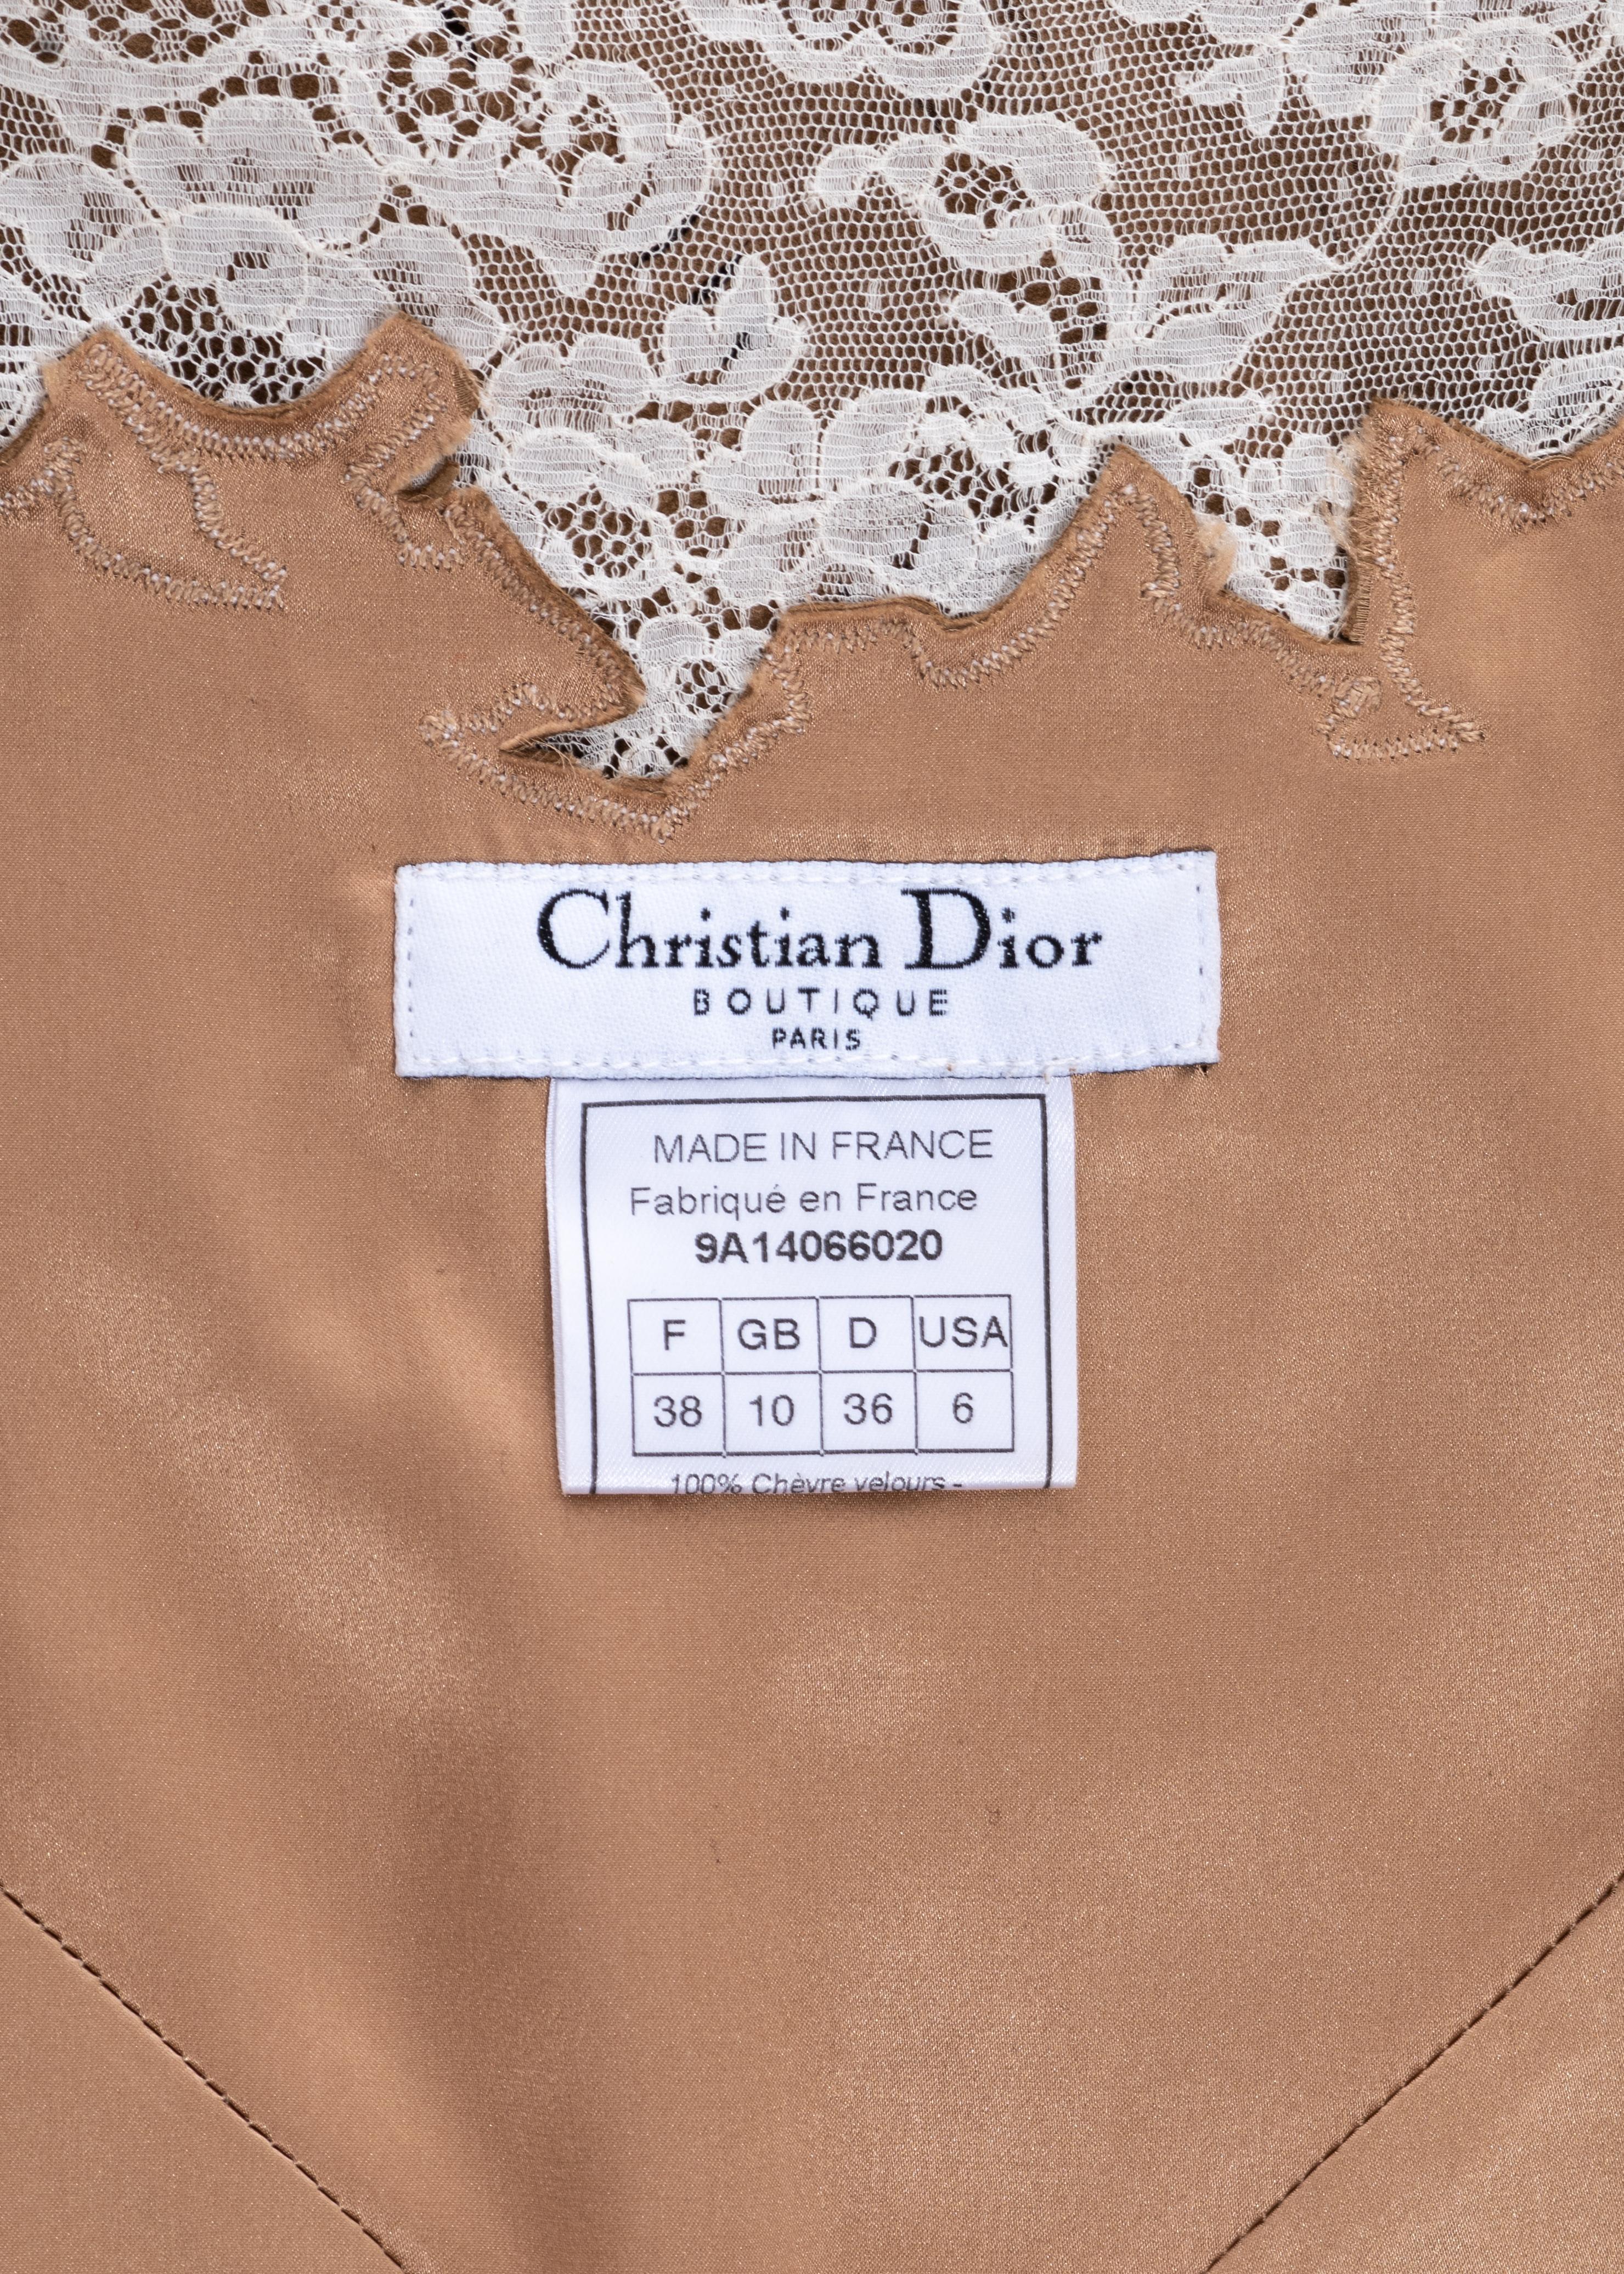 Christian Dior by John Galliano Brown and Cream Suede Dress and Jacket, FW 1999 For Sale 5